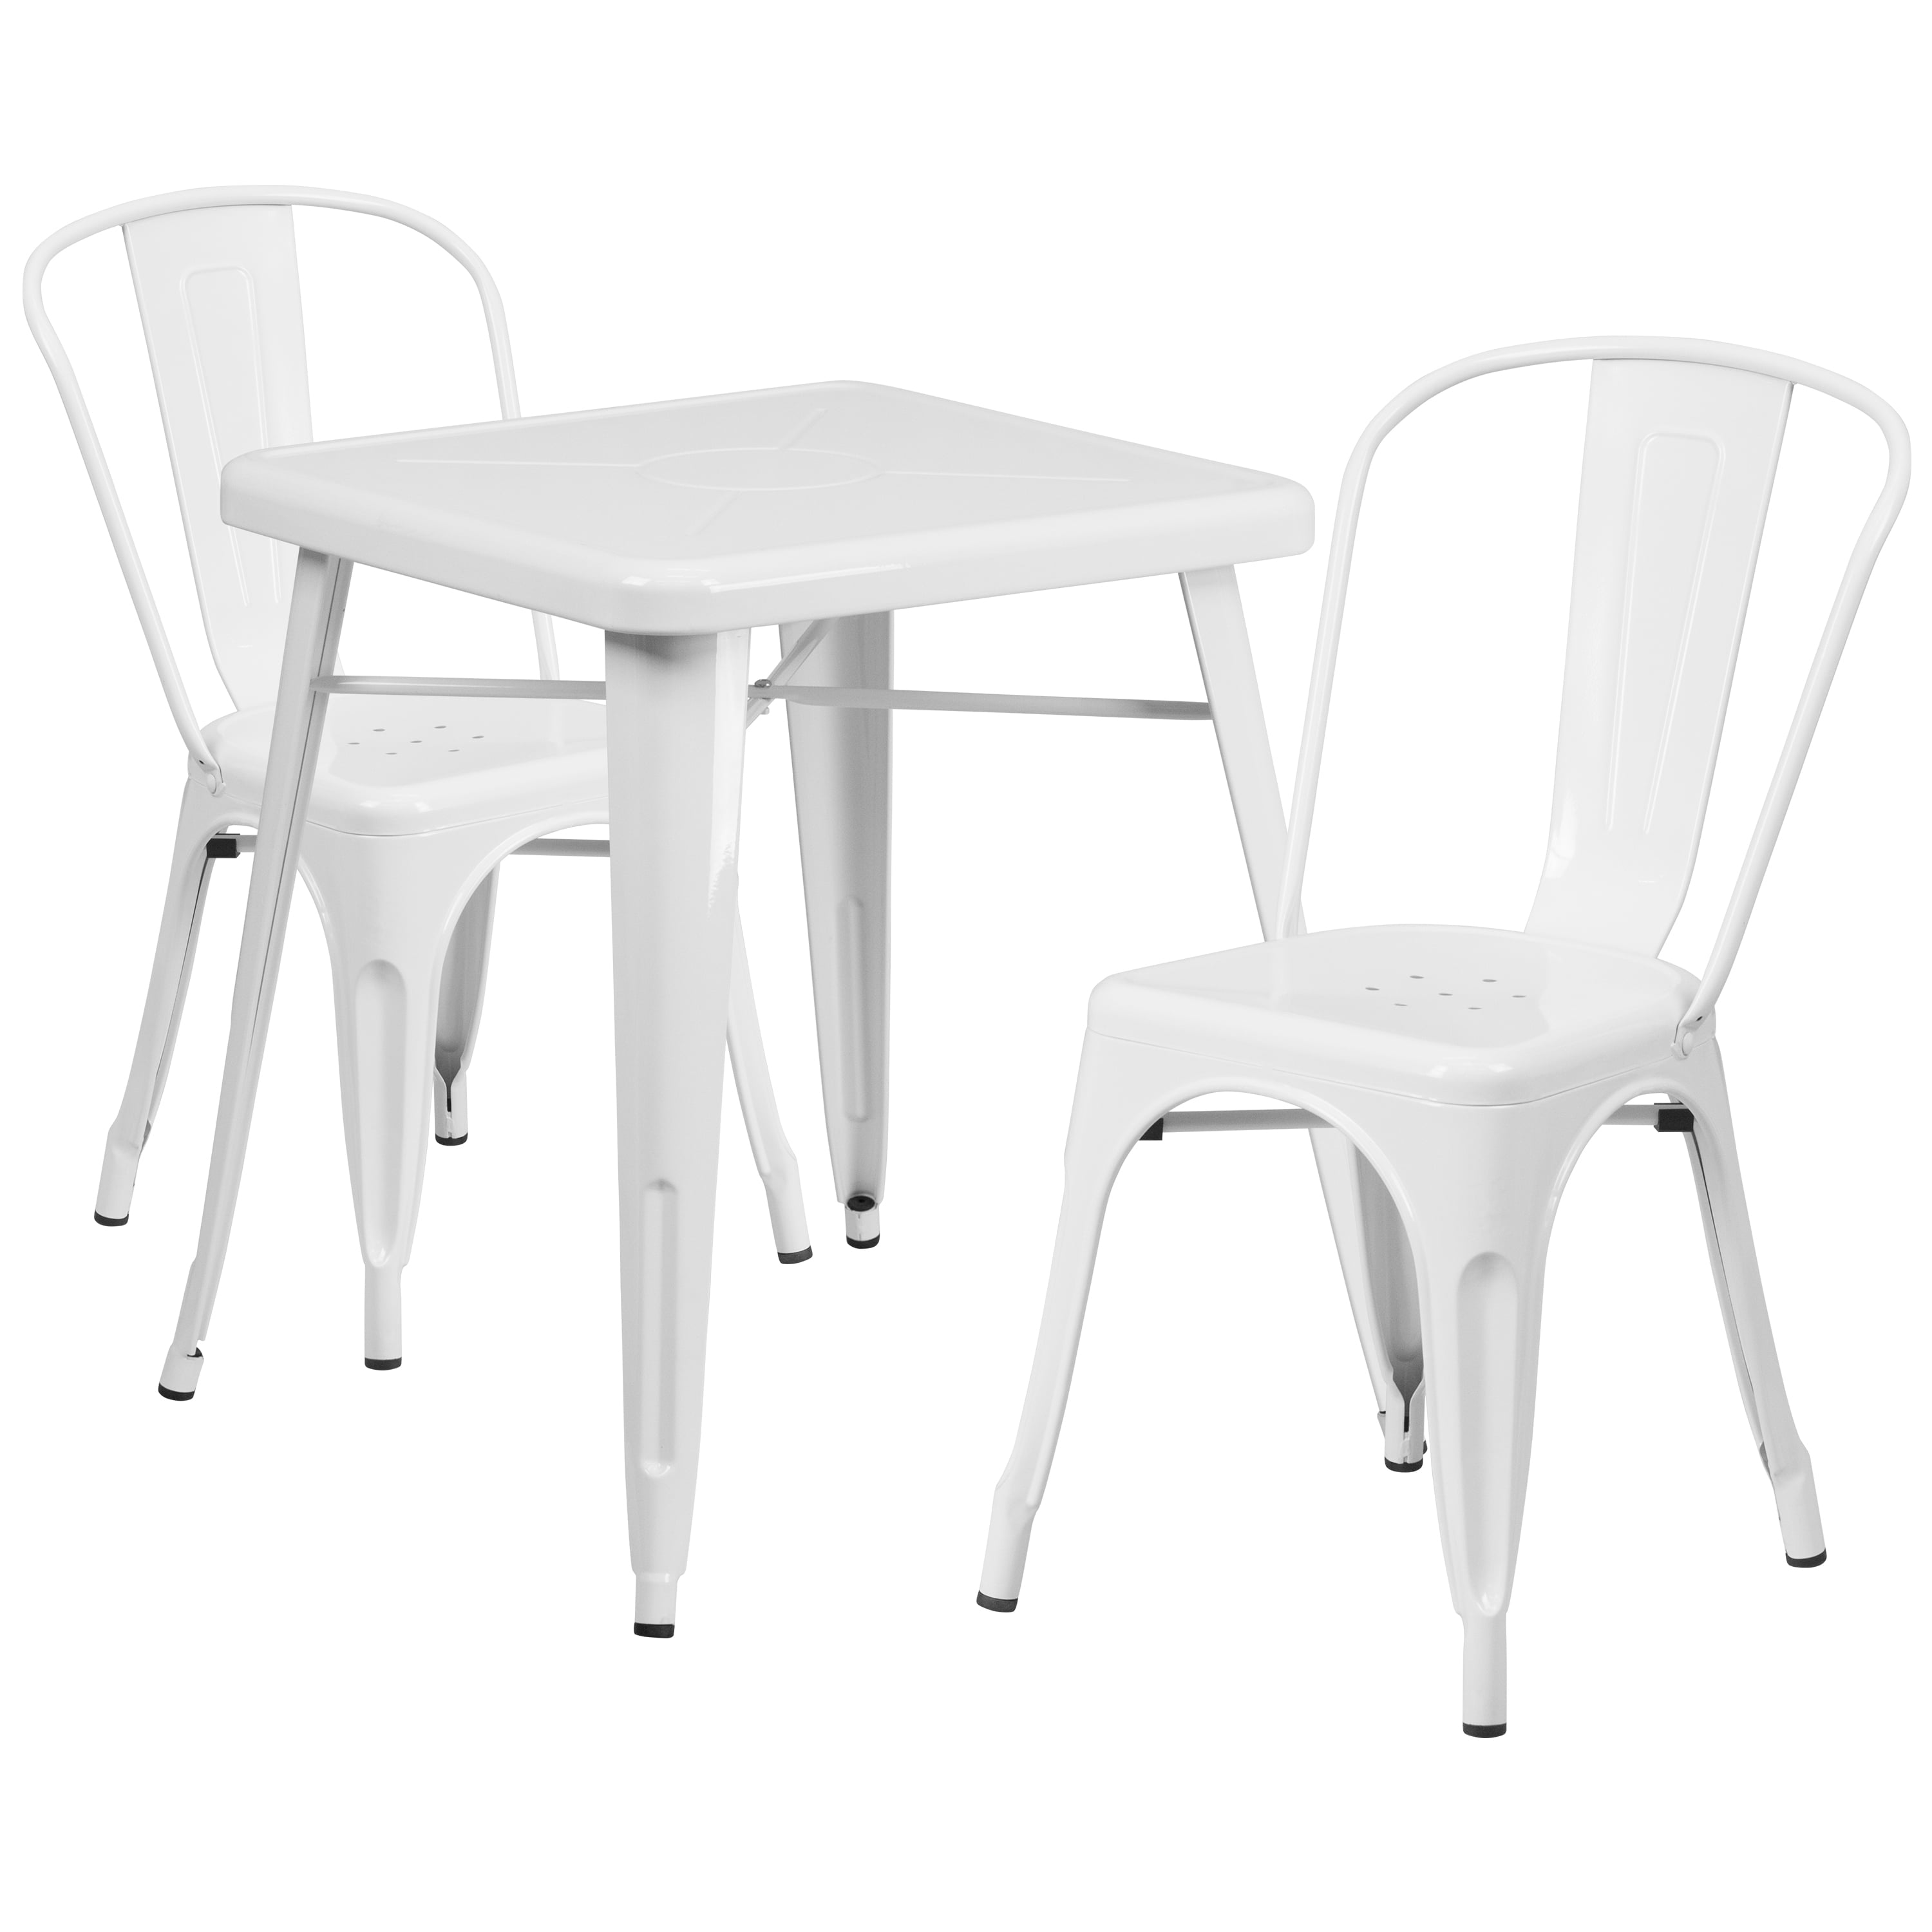 Flash Furniture Commercial Grade 23.75" Square White Metal Indoor-Outdoor Table Set with 2 Stack Chairs - image 2 of 5